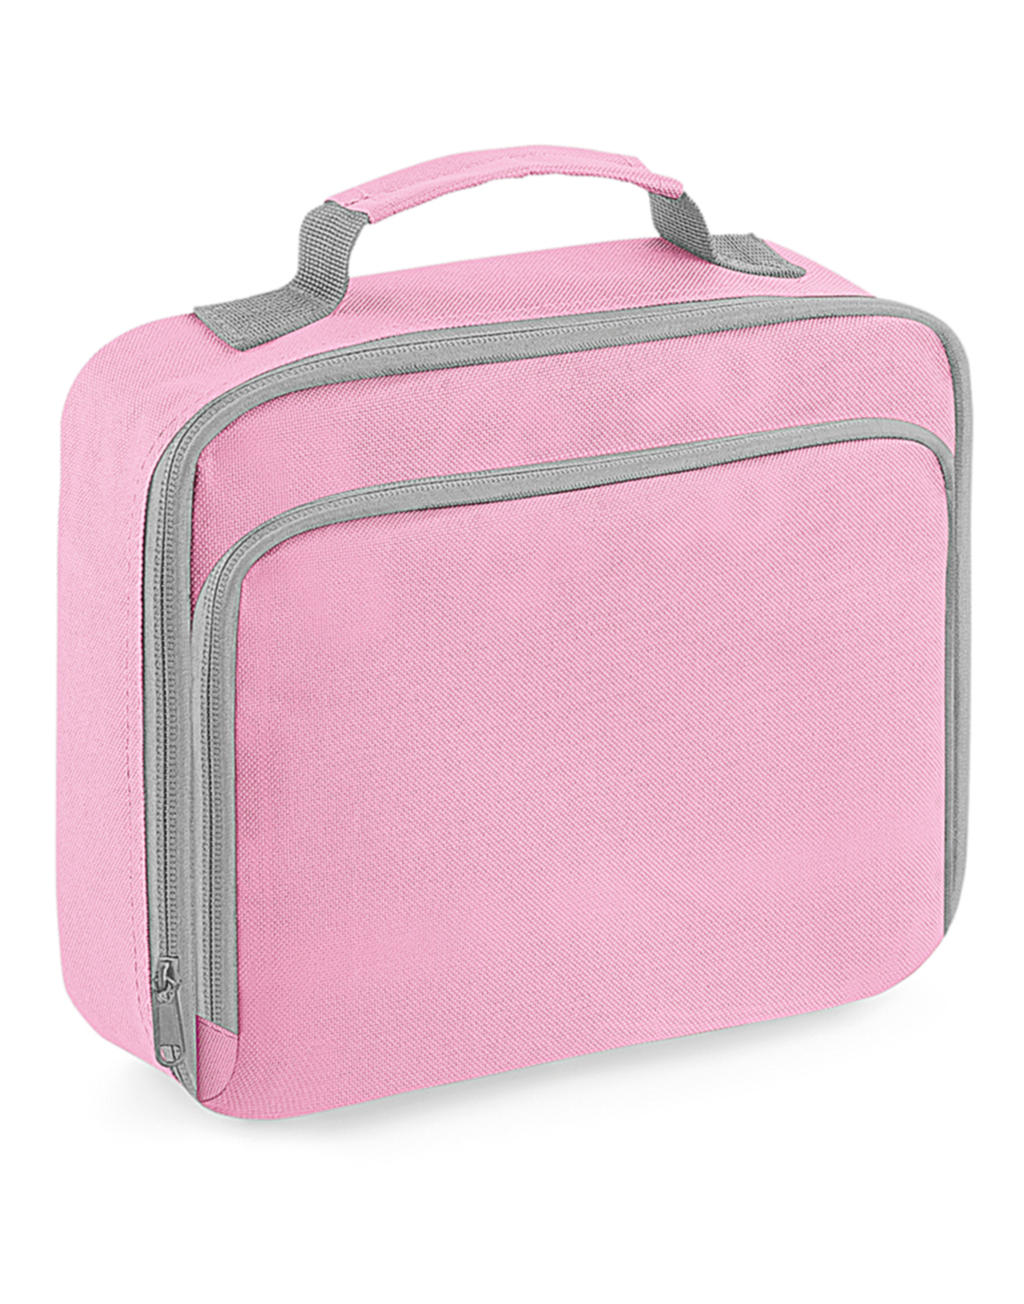  Lunch Cooler Bag in Farbe Black